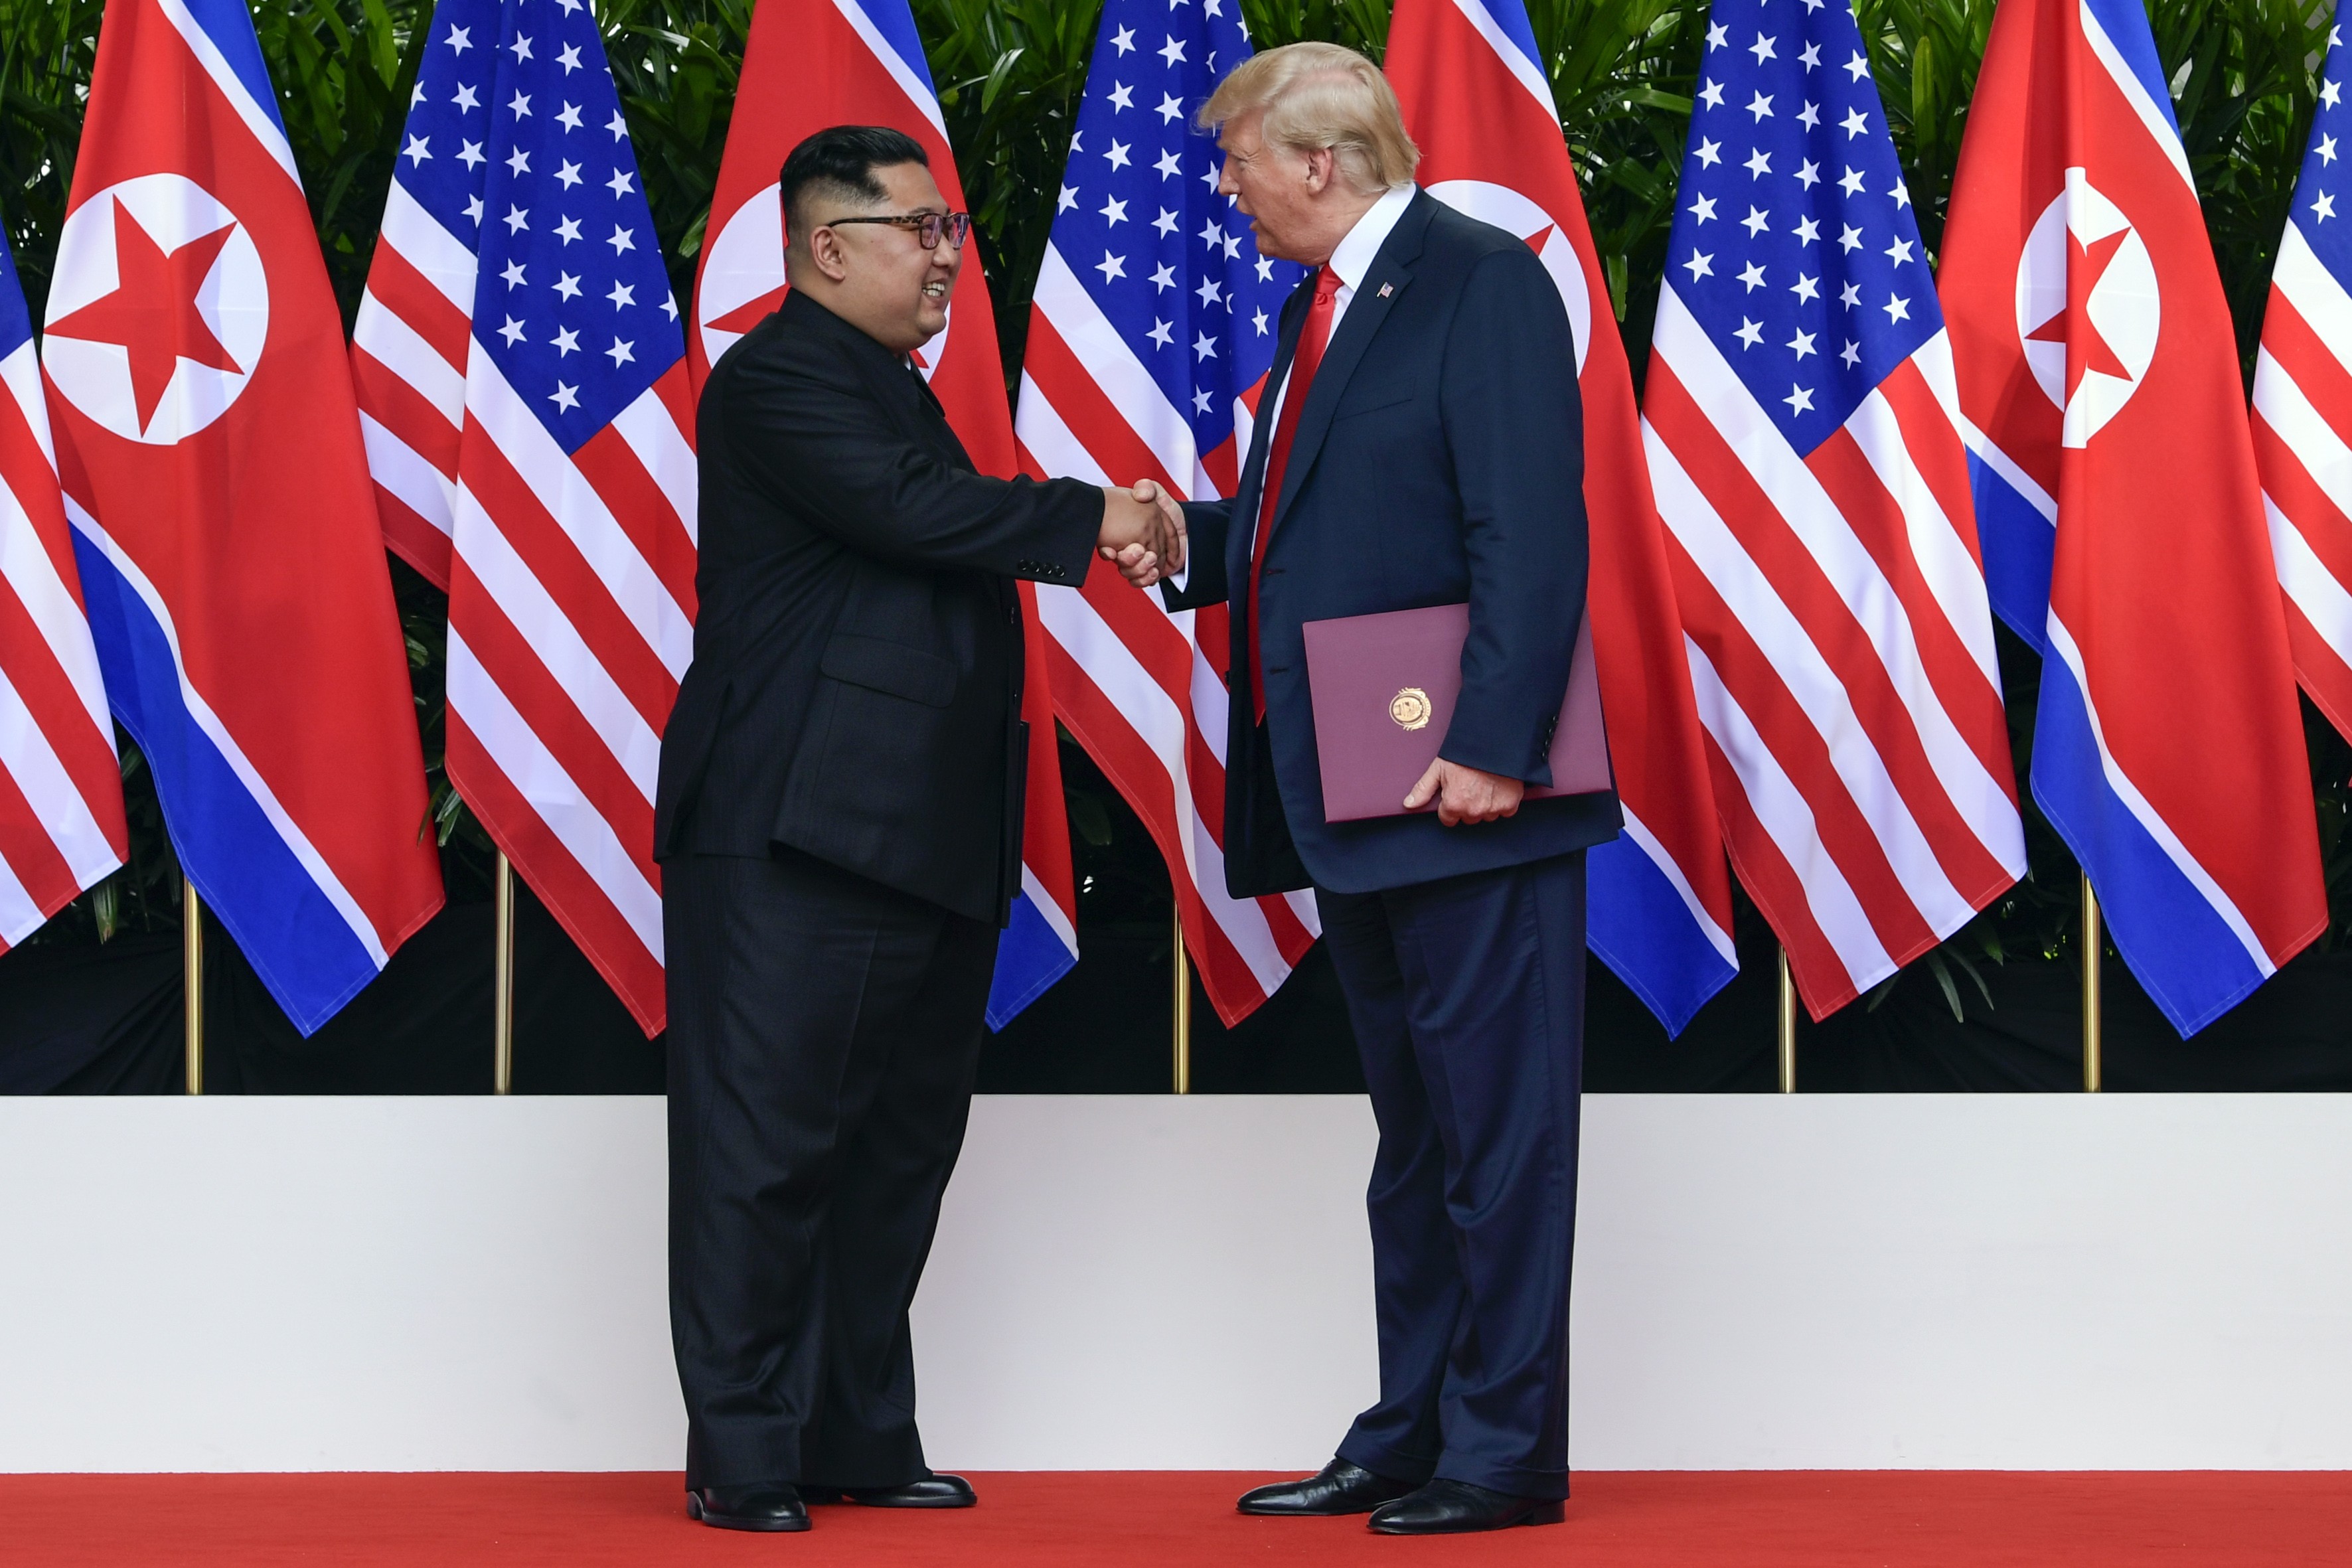 North Korea leader Kim Jong-un (left) and US President Donald Trump shake hands after their meetings on Sentosa Island in Singapore on June 12. Photo: AFP